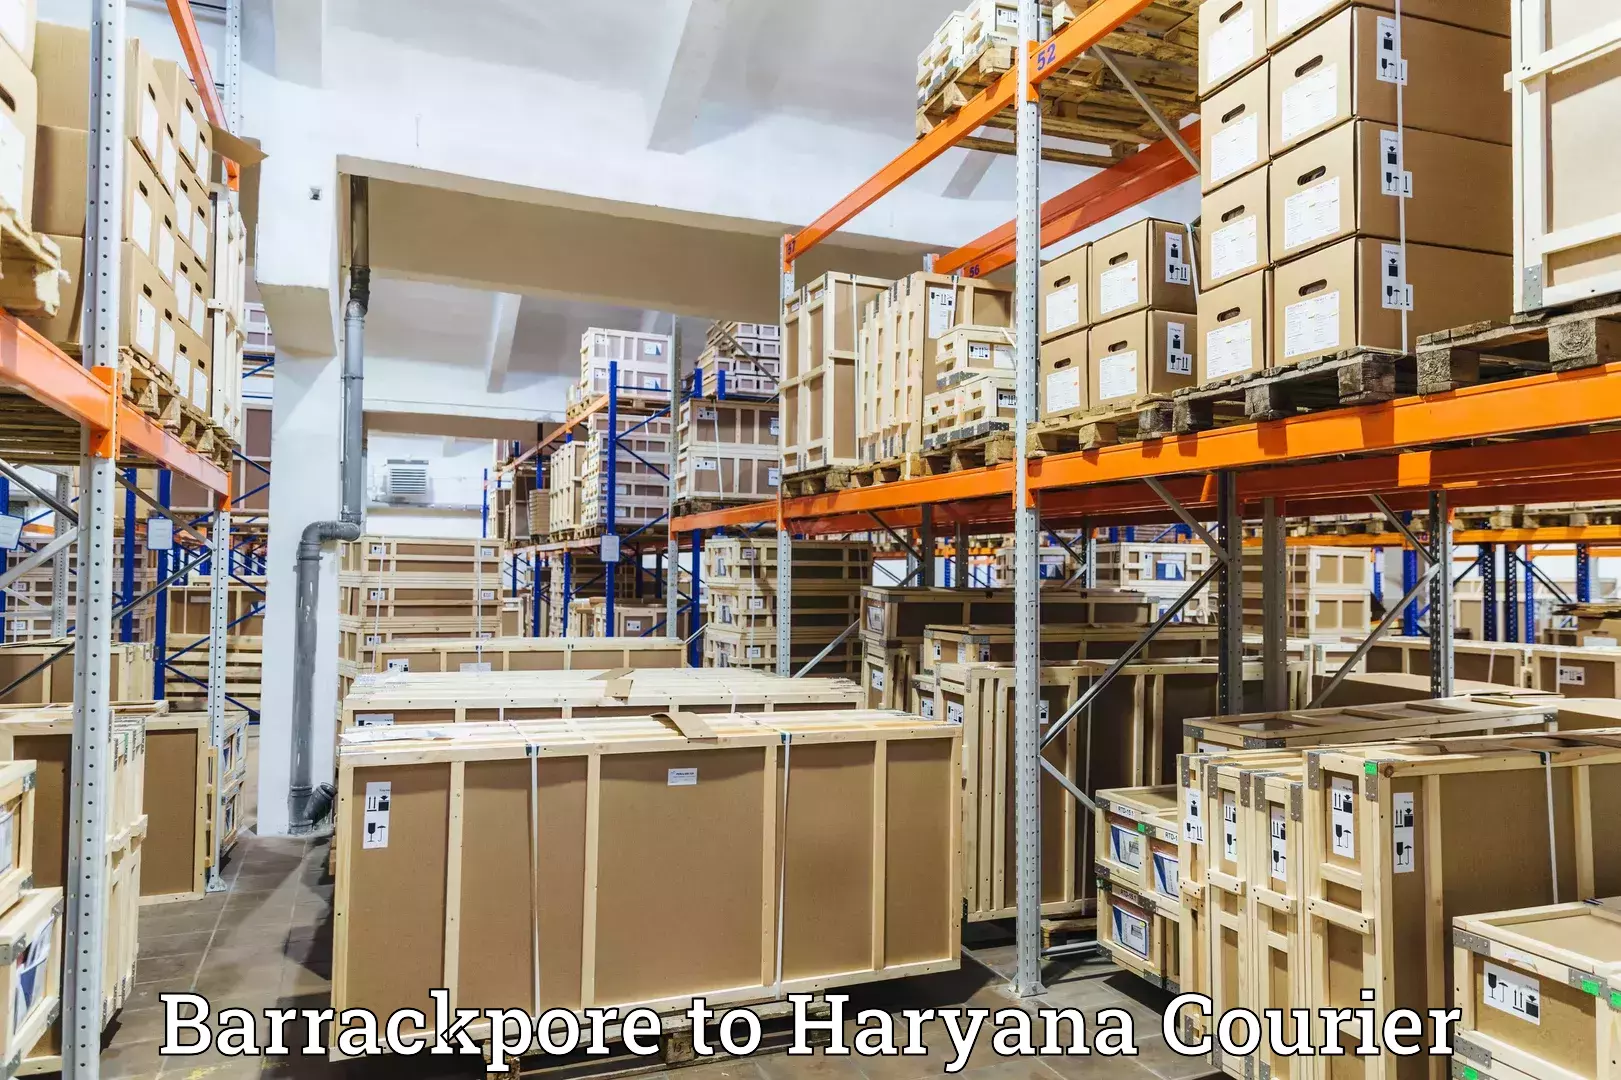 Express delivery capabilities in Barrackpore to Nuh